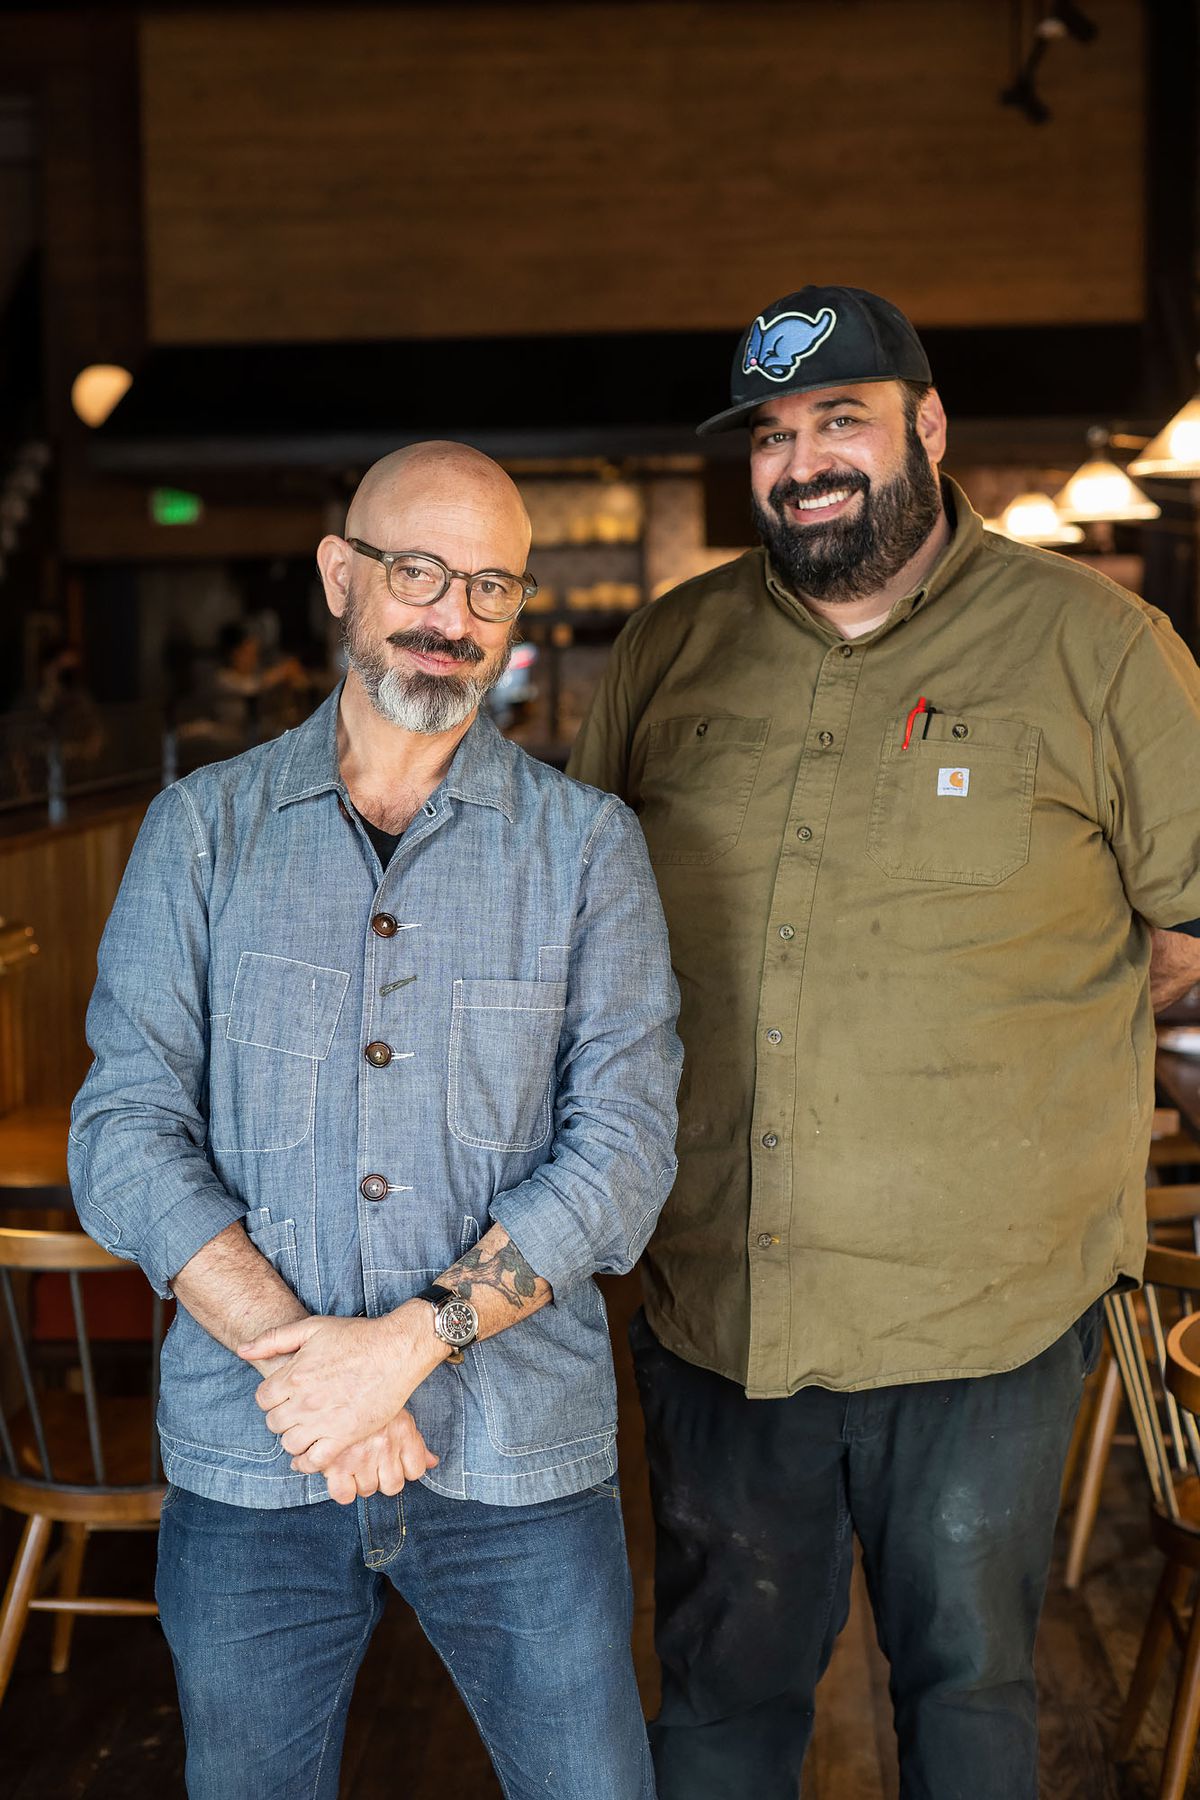 Two men wearing button up work shirt stand and smile inside a new restaurant.